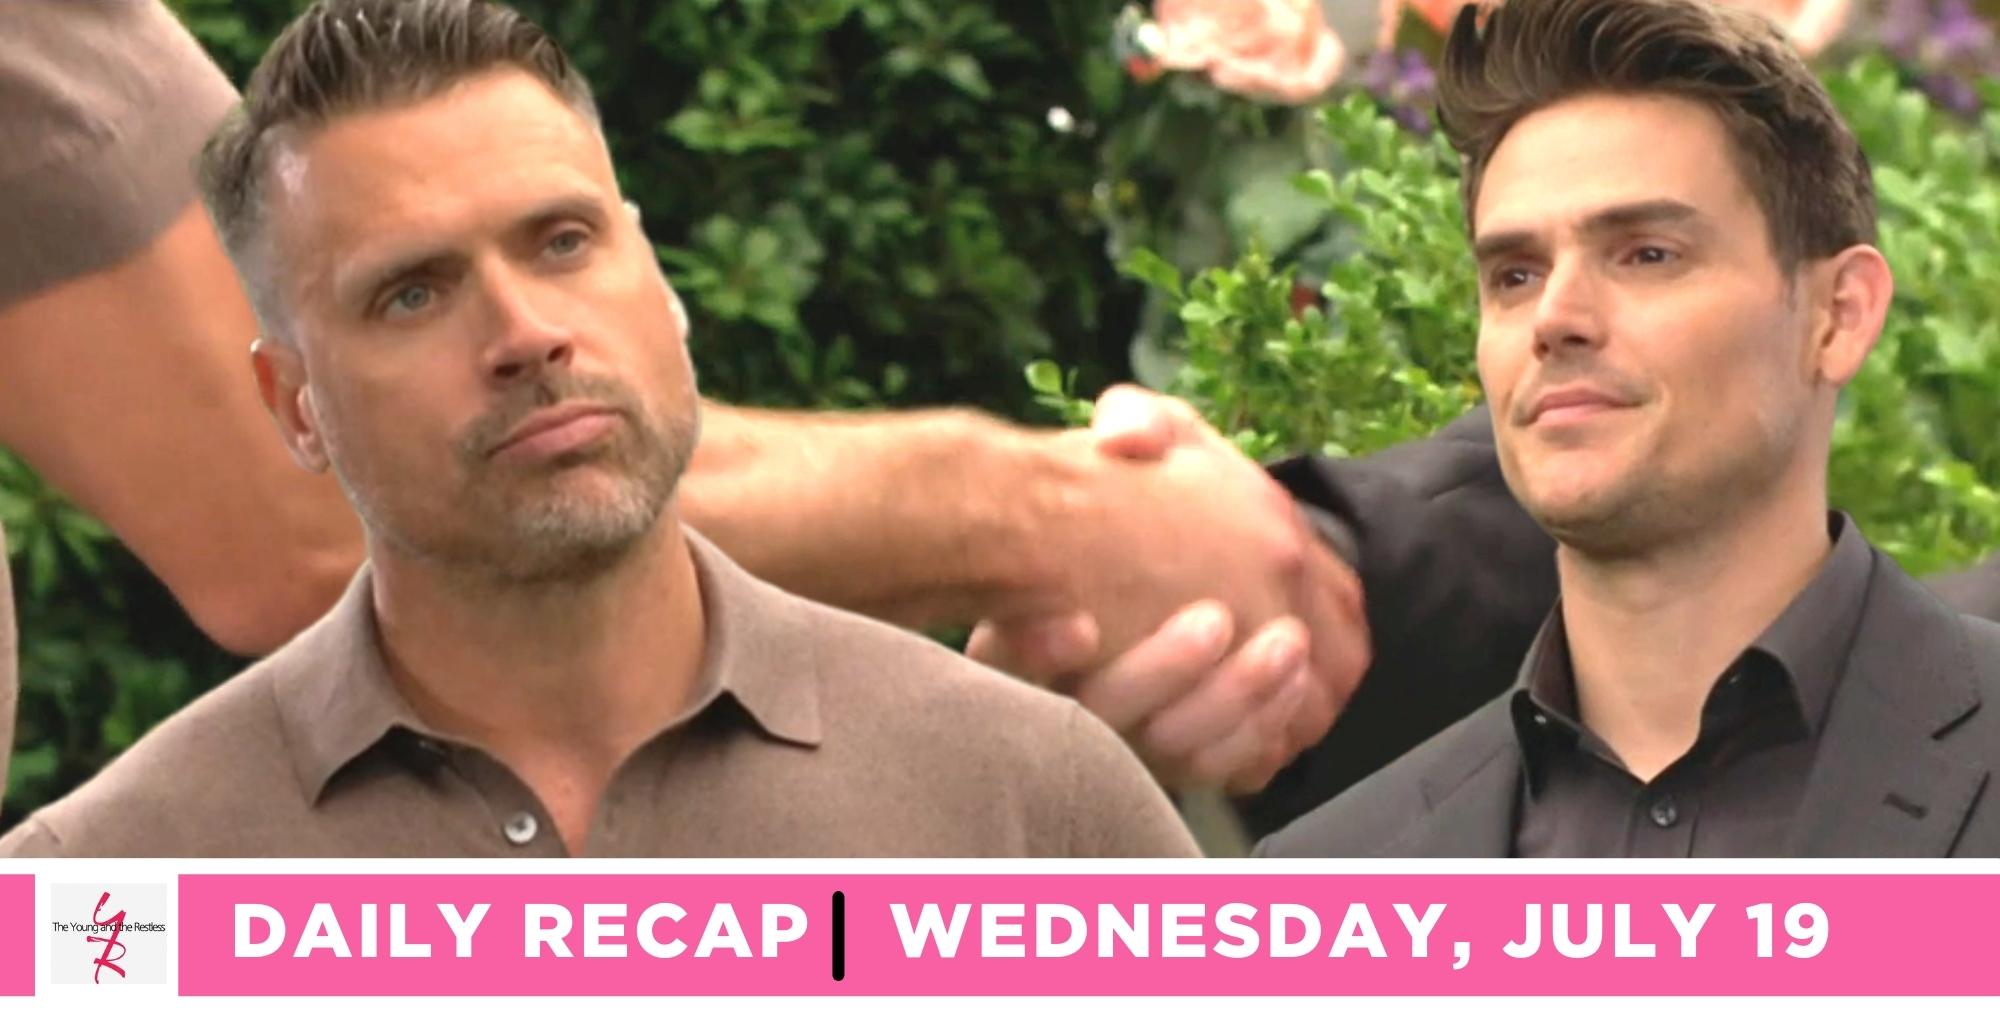 the young and the restless recap for july 19, 2023, has nick and adam talking and shaking hands in background.